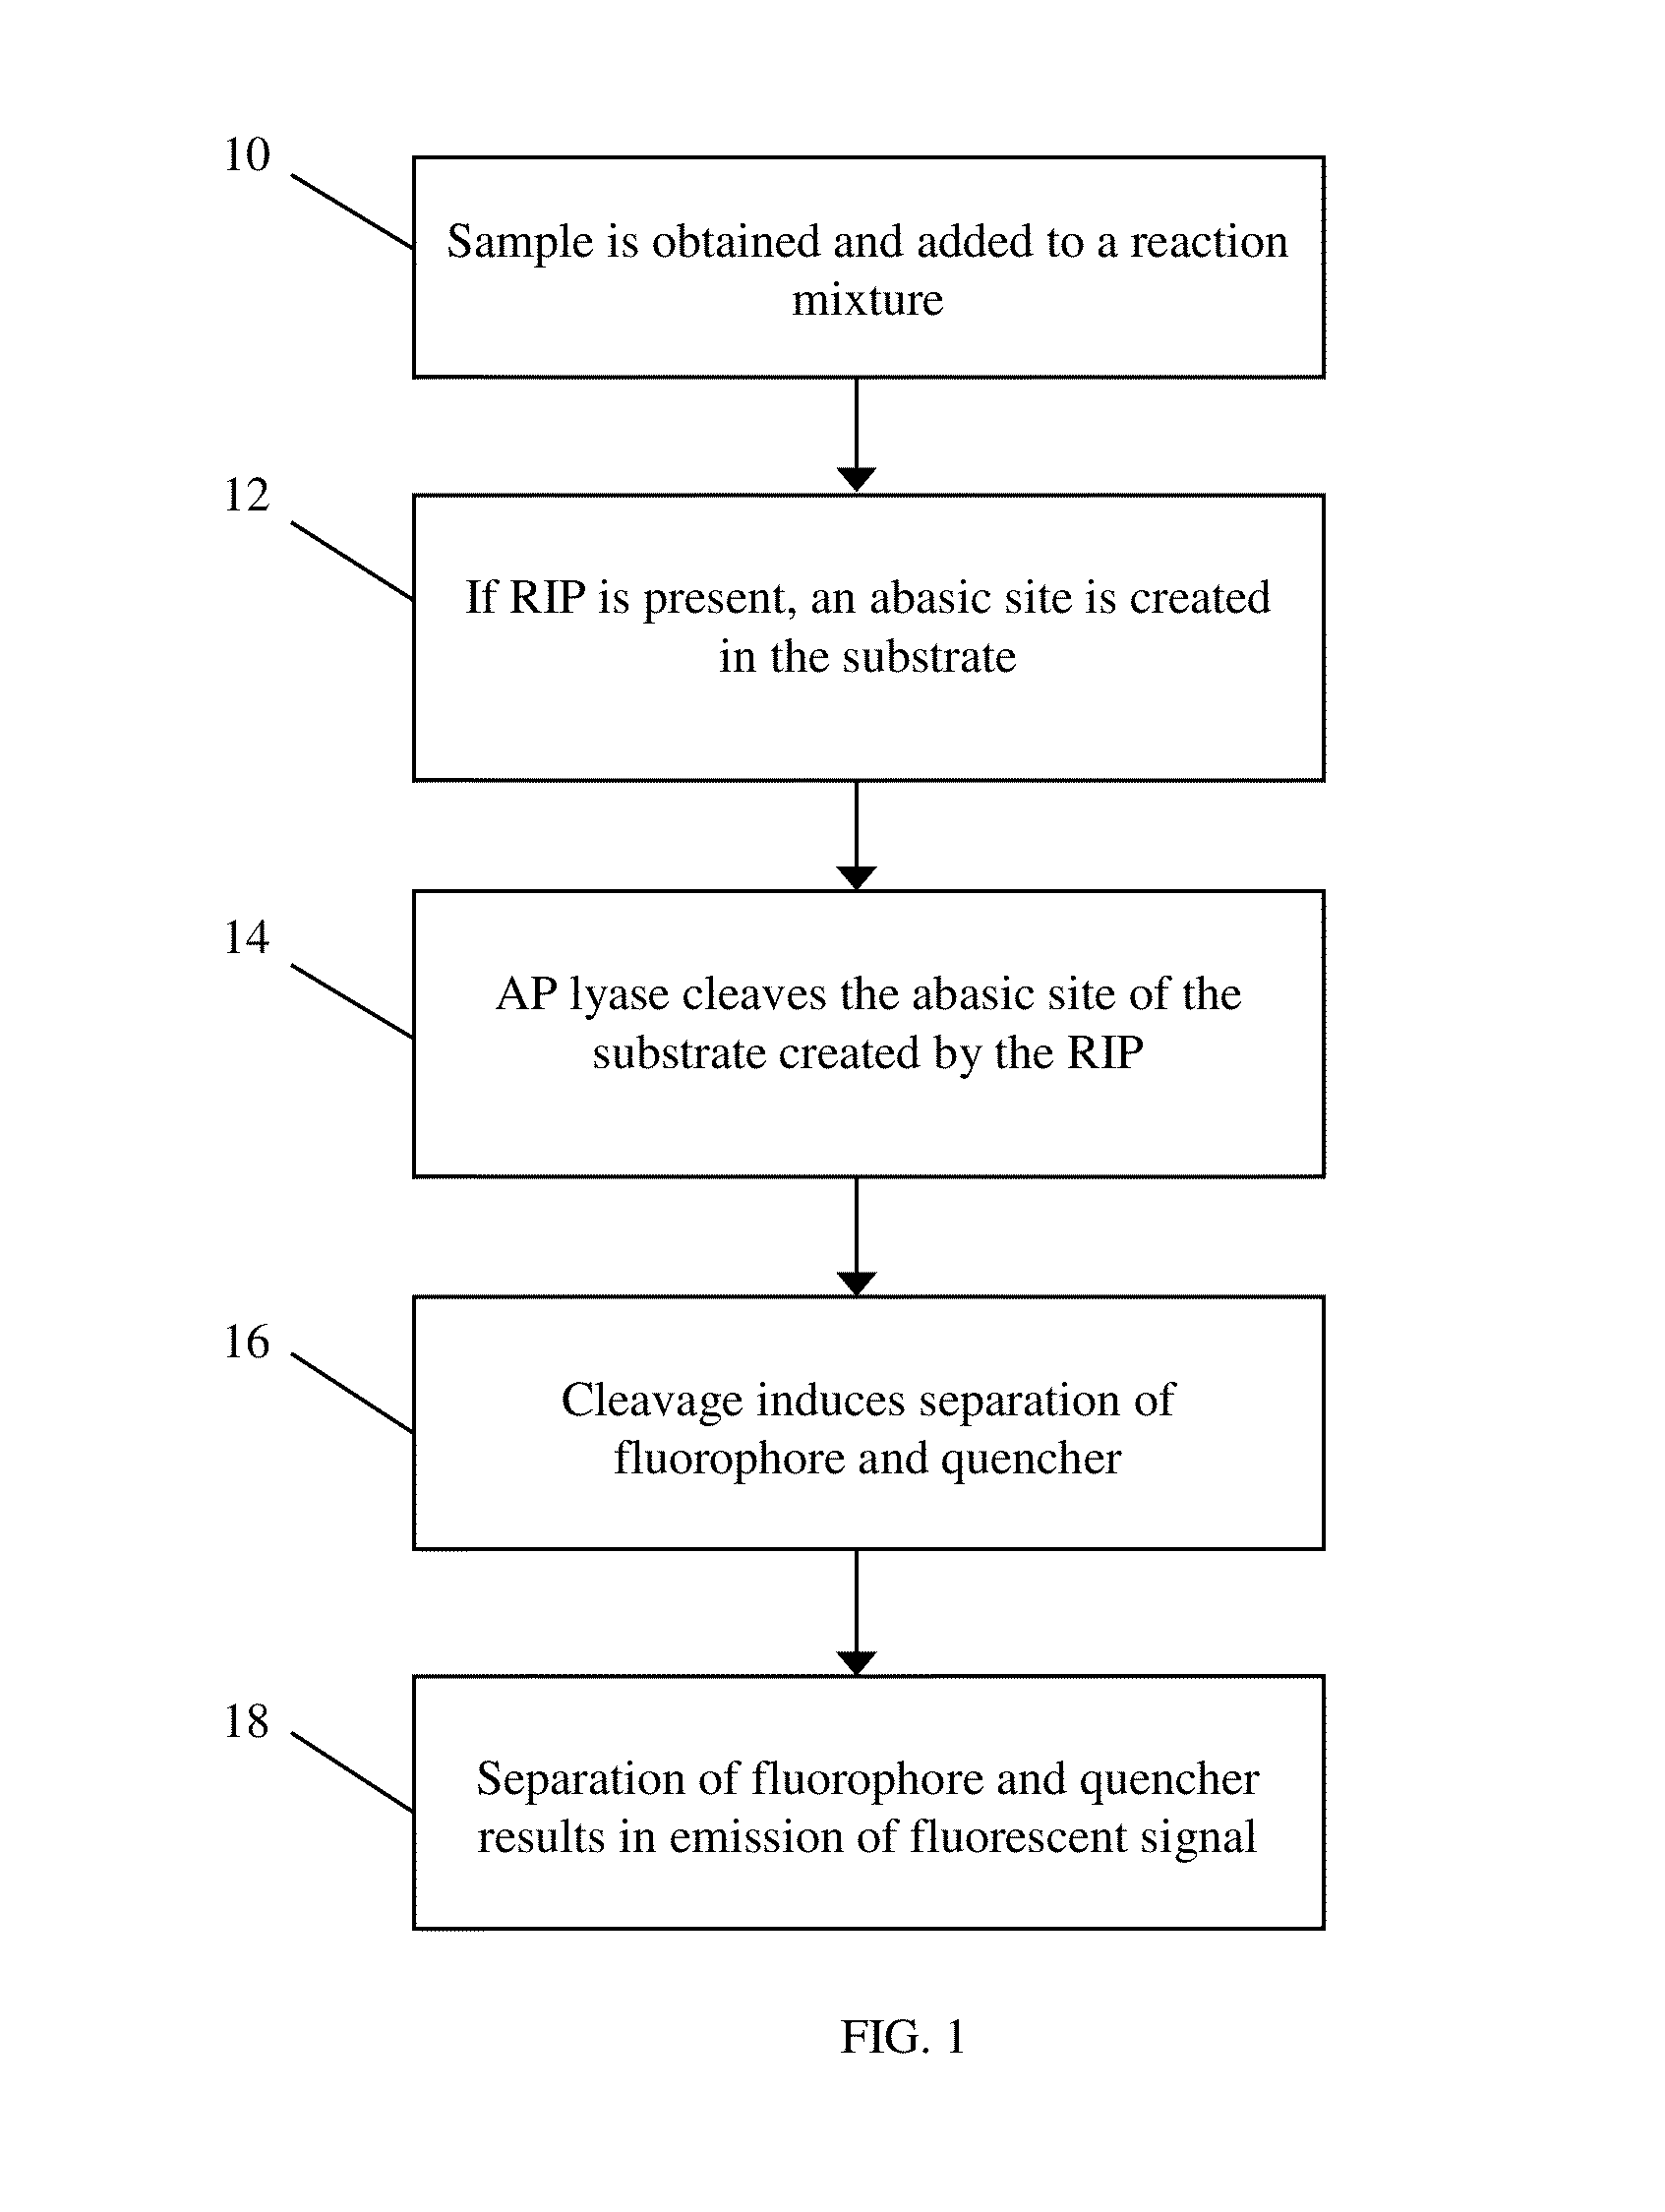 Methods and Systems for the Detection of Ricin and Other Ribosome Inactivating Proteins